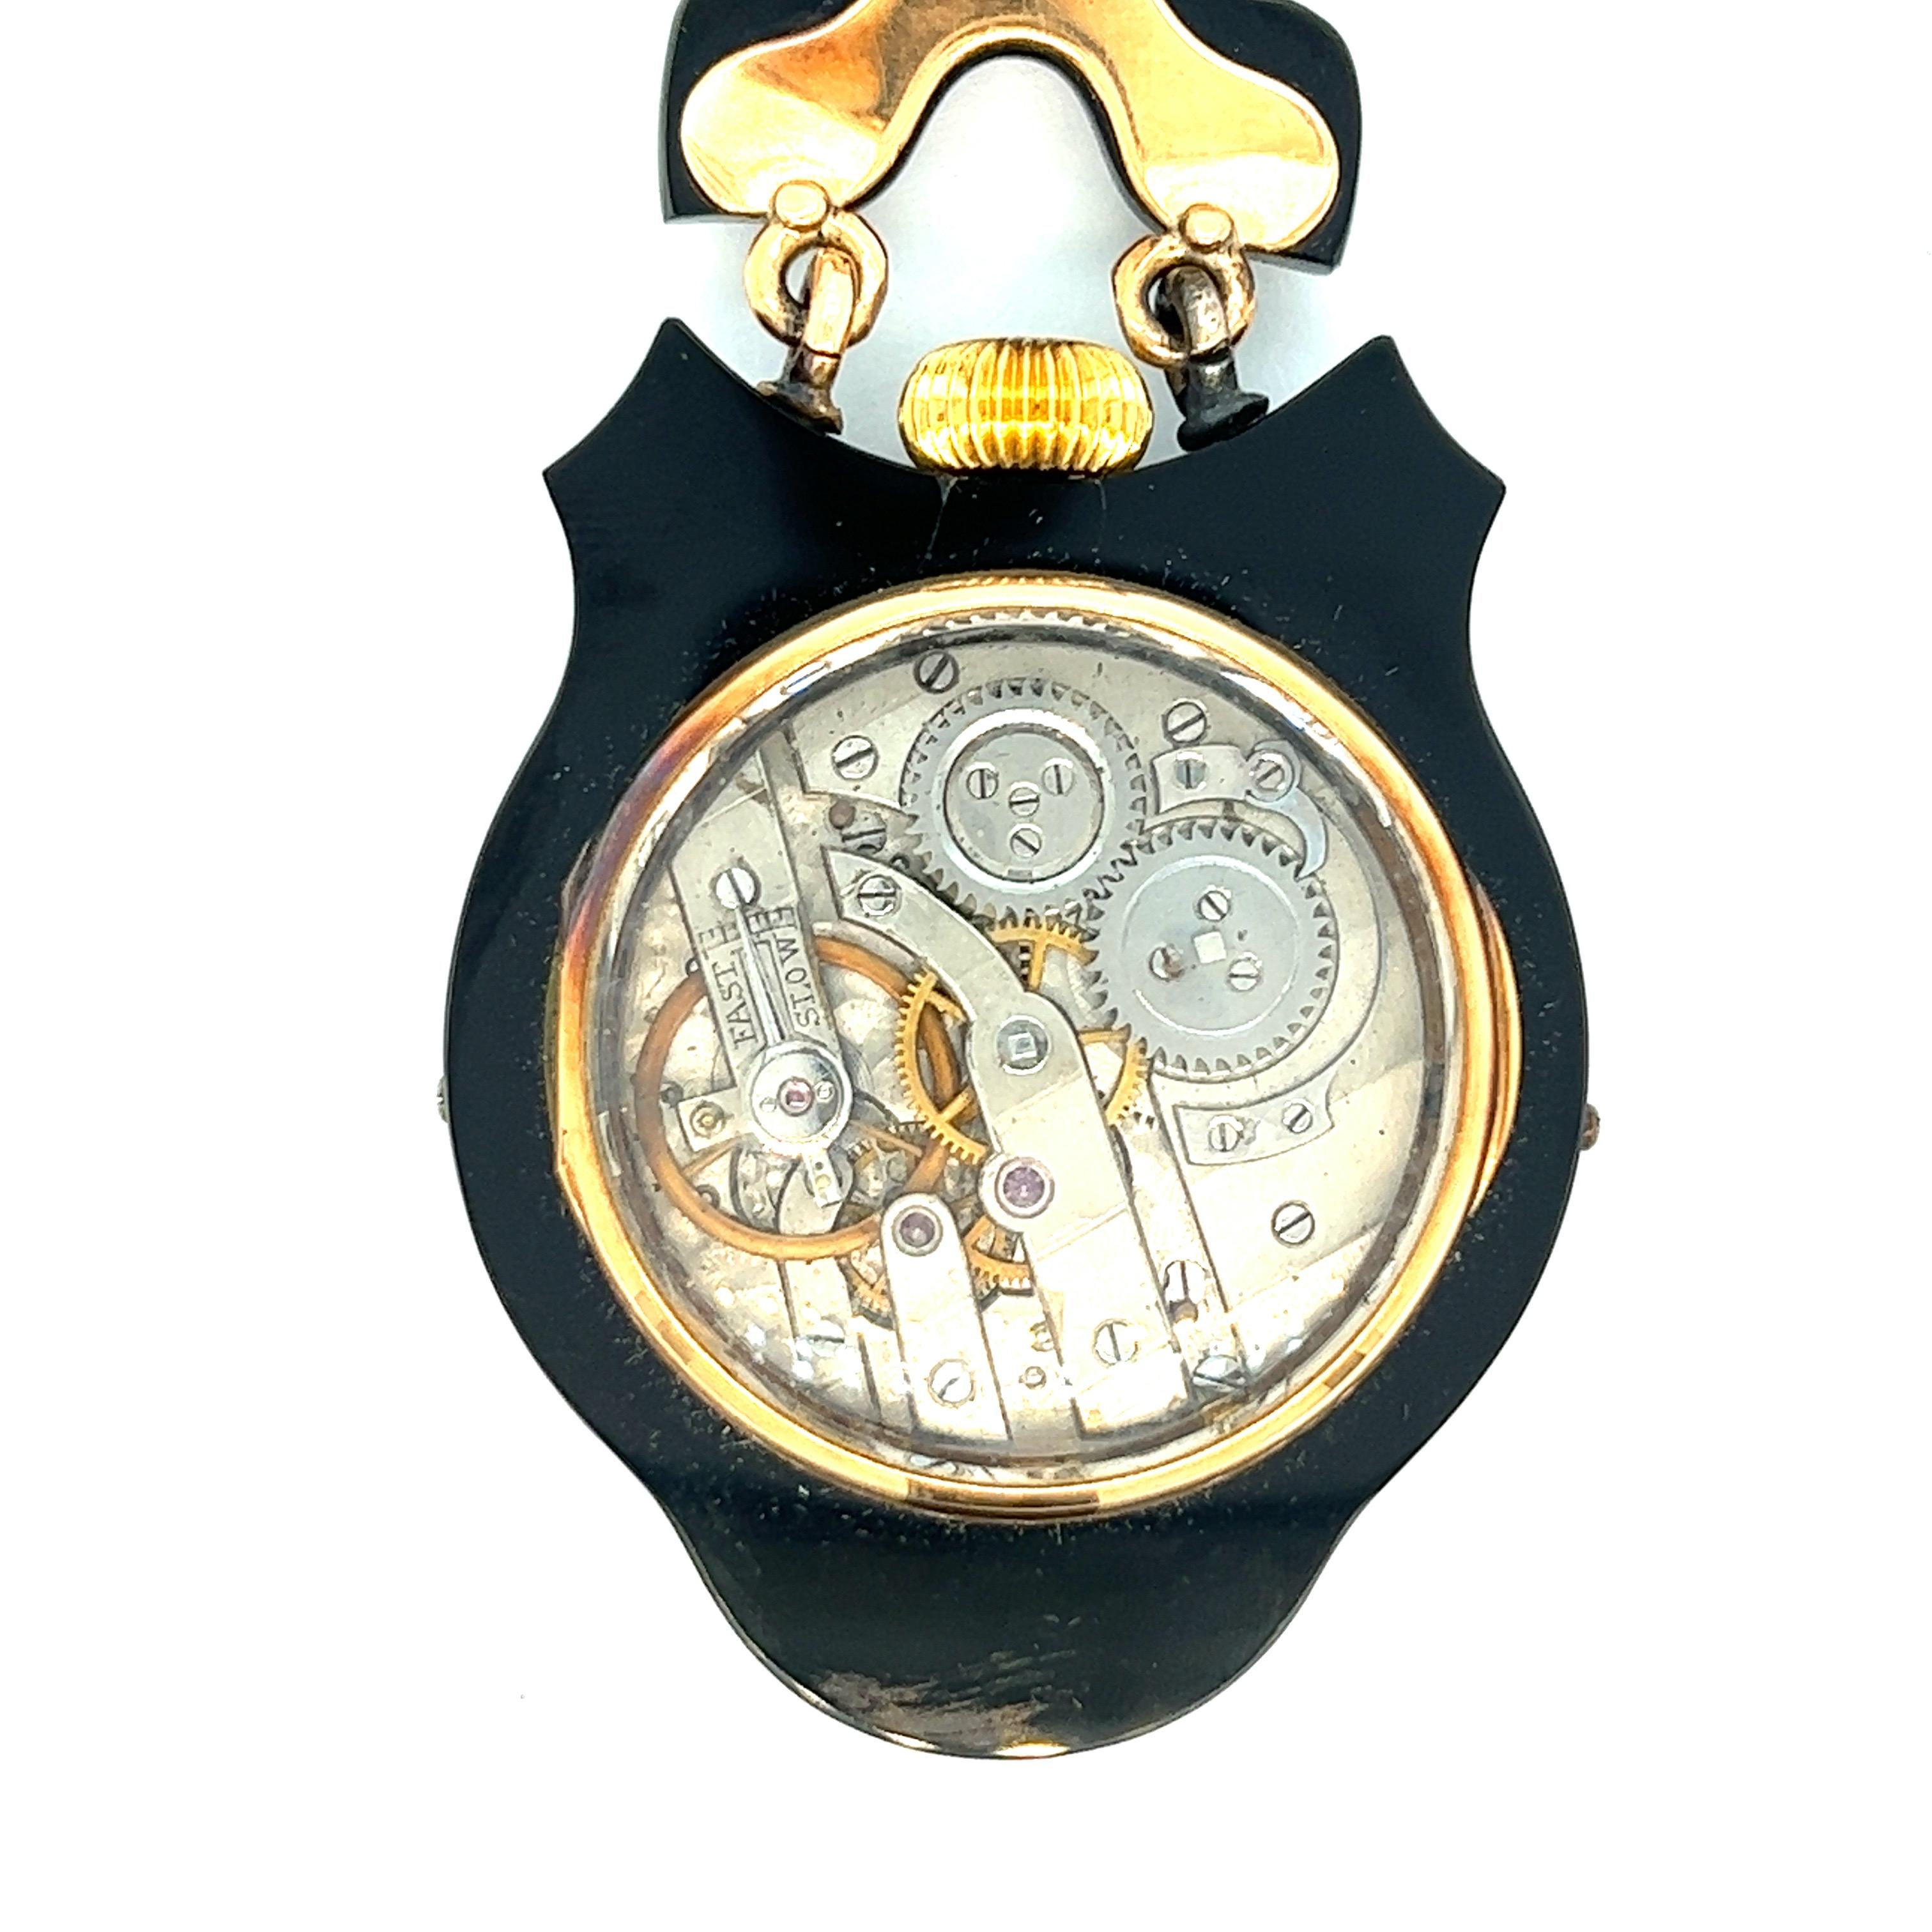 Black Onyx with Pearls Lapel Mourning Watch In Excellent Condition For Sale In New York, NY